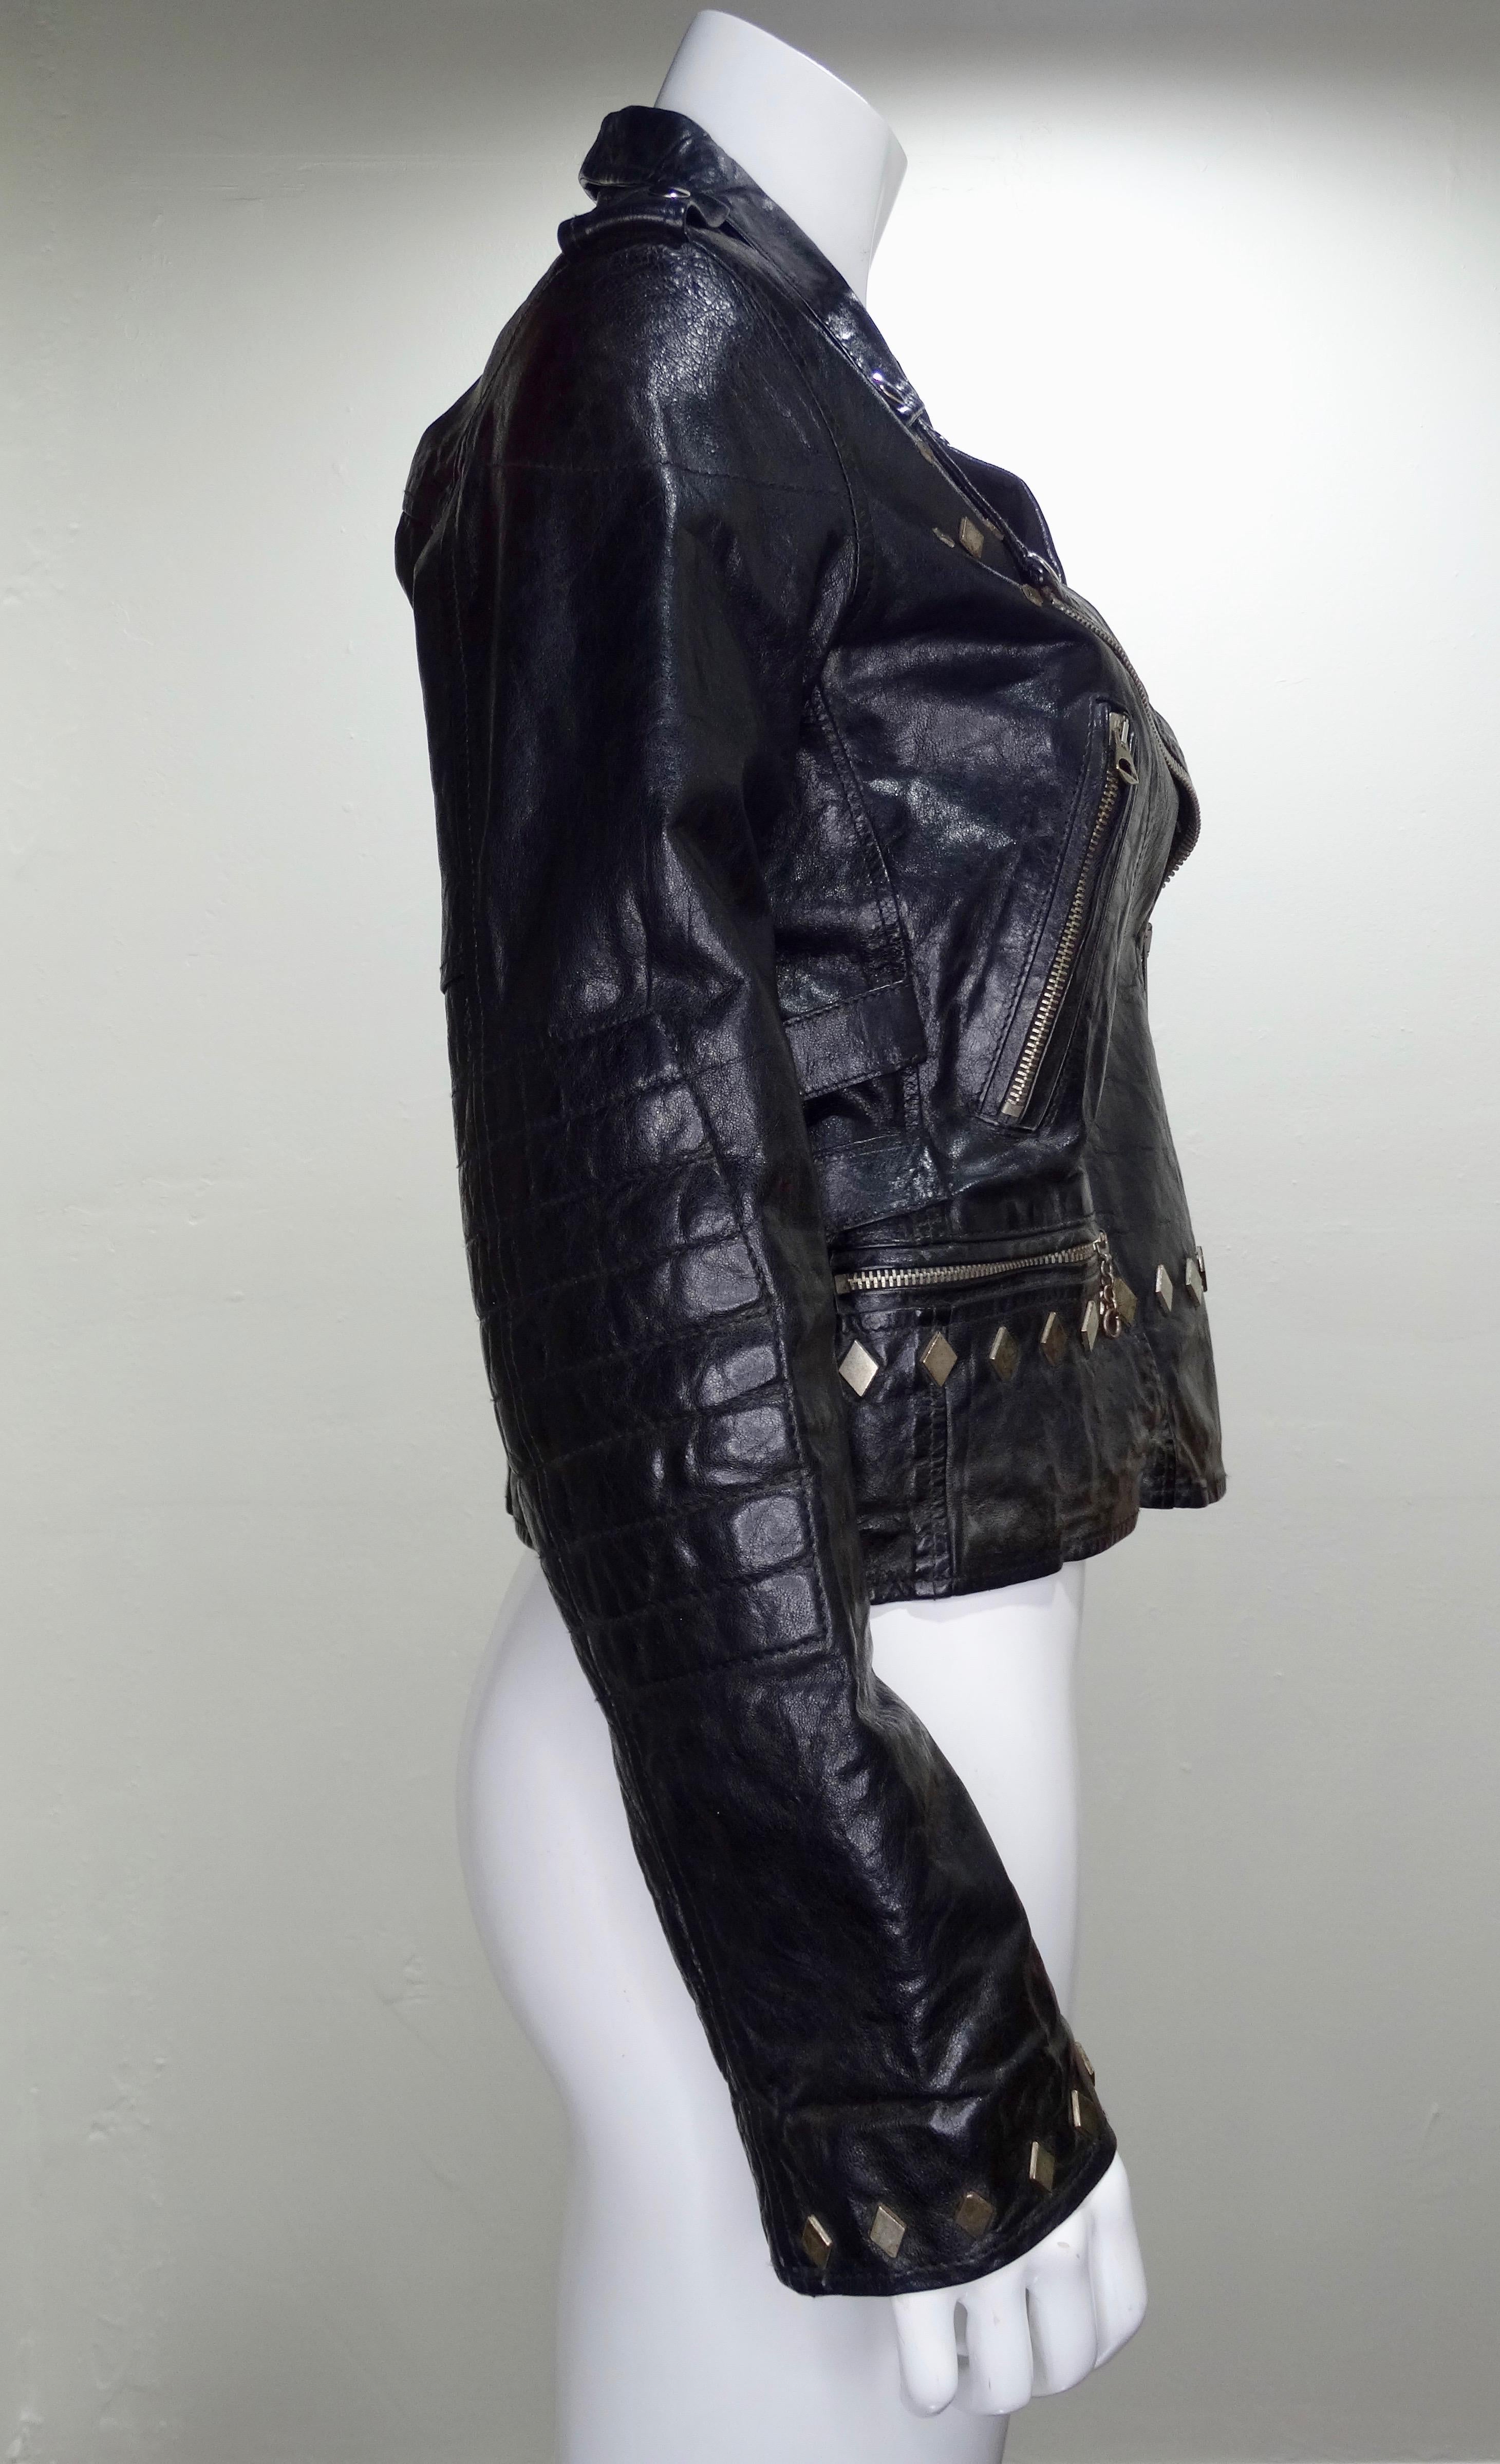 Everyone needs a great leather jacket in their closet! Circa recent 2000s, this motorcycle jacket features Golden Goose's signature distressed leather with gunmetal hardware, diamond shaped studs, notched lapel, a zip and press stud fastening,